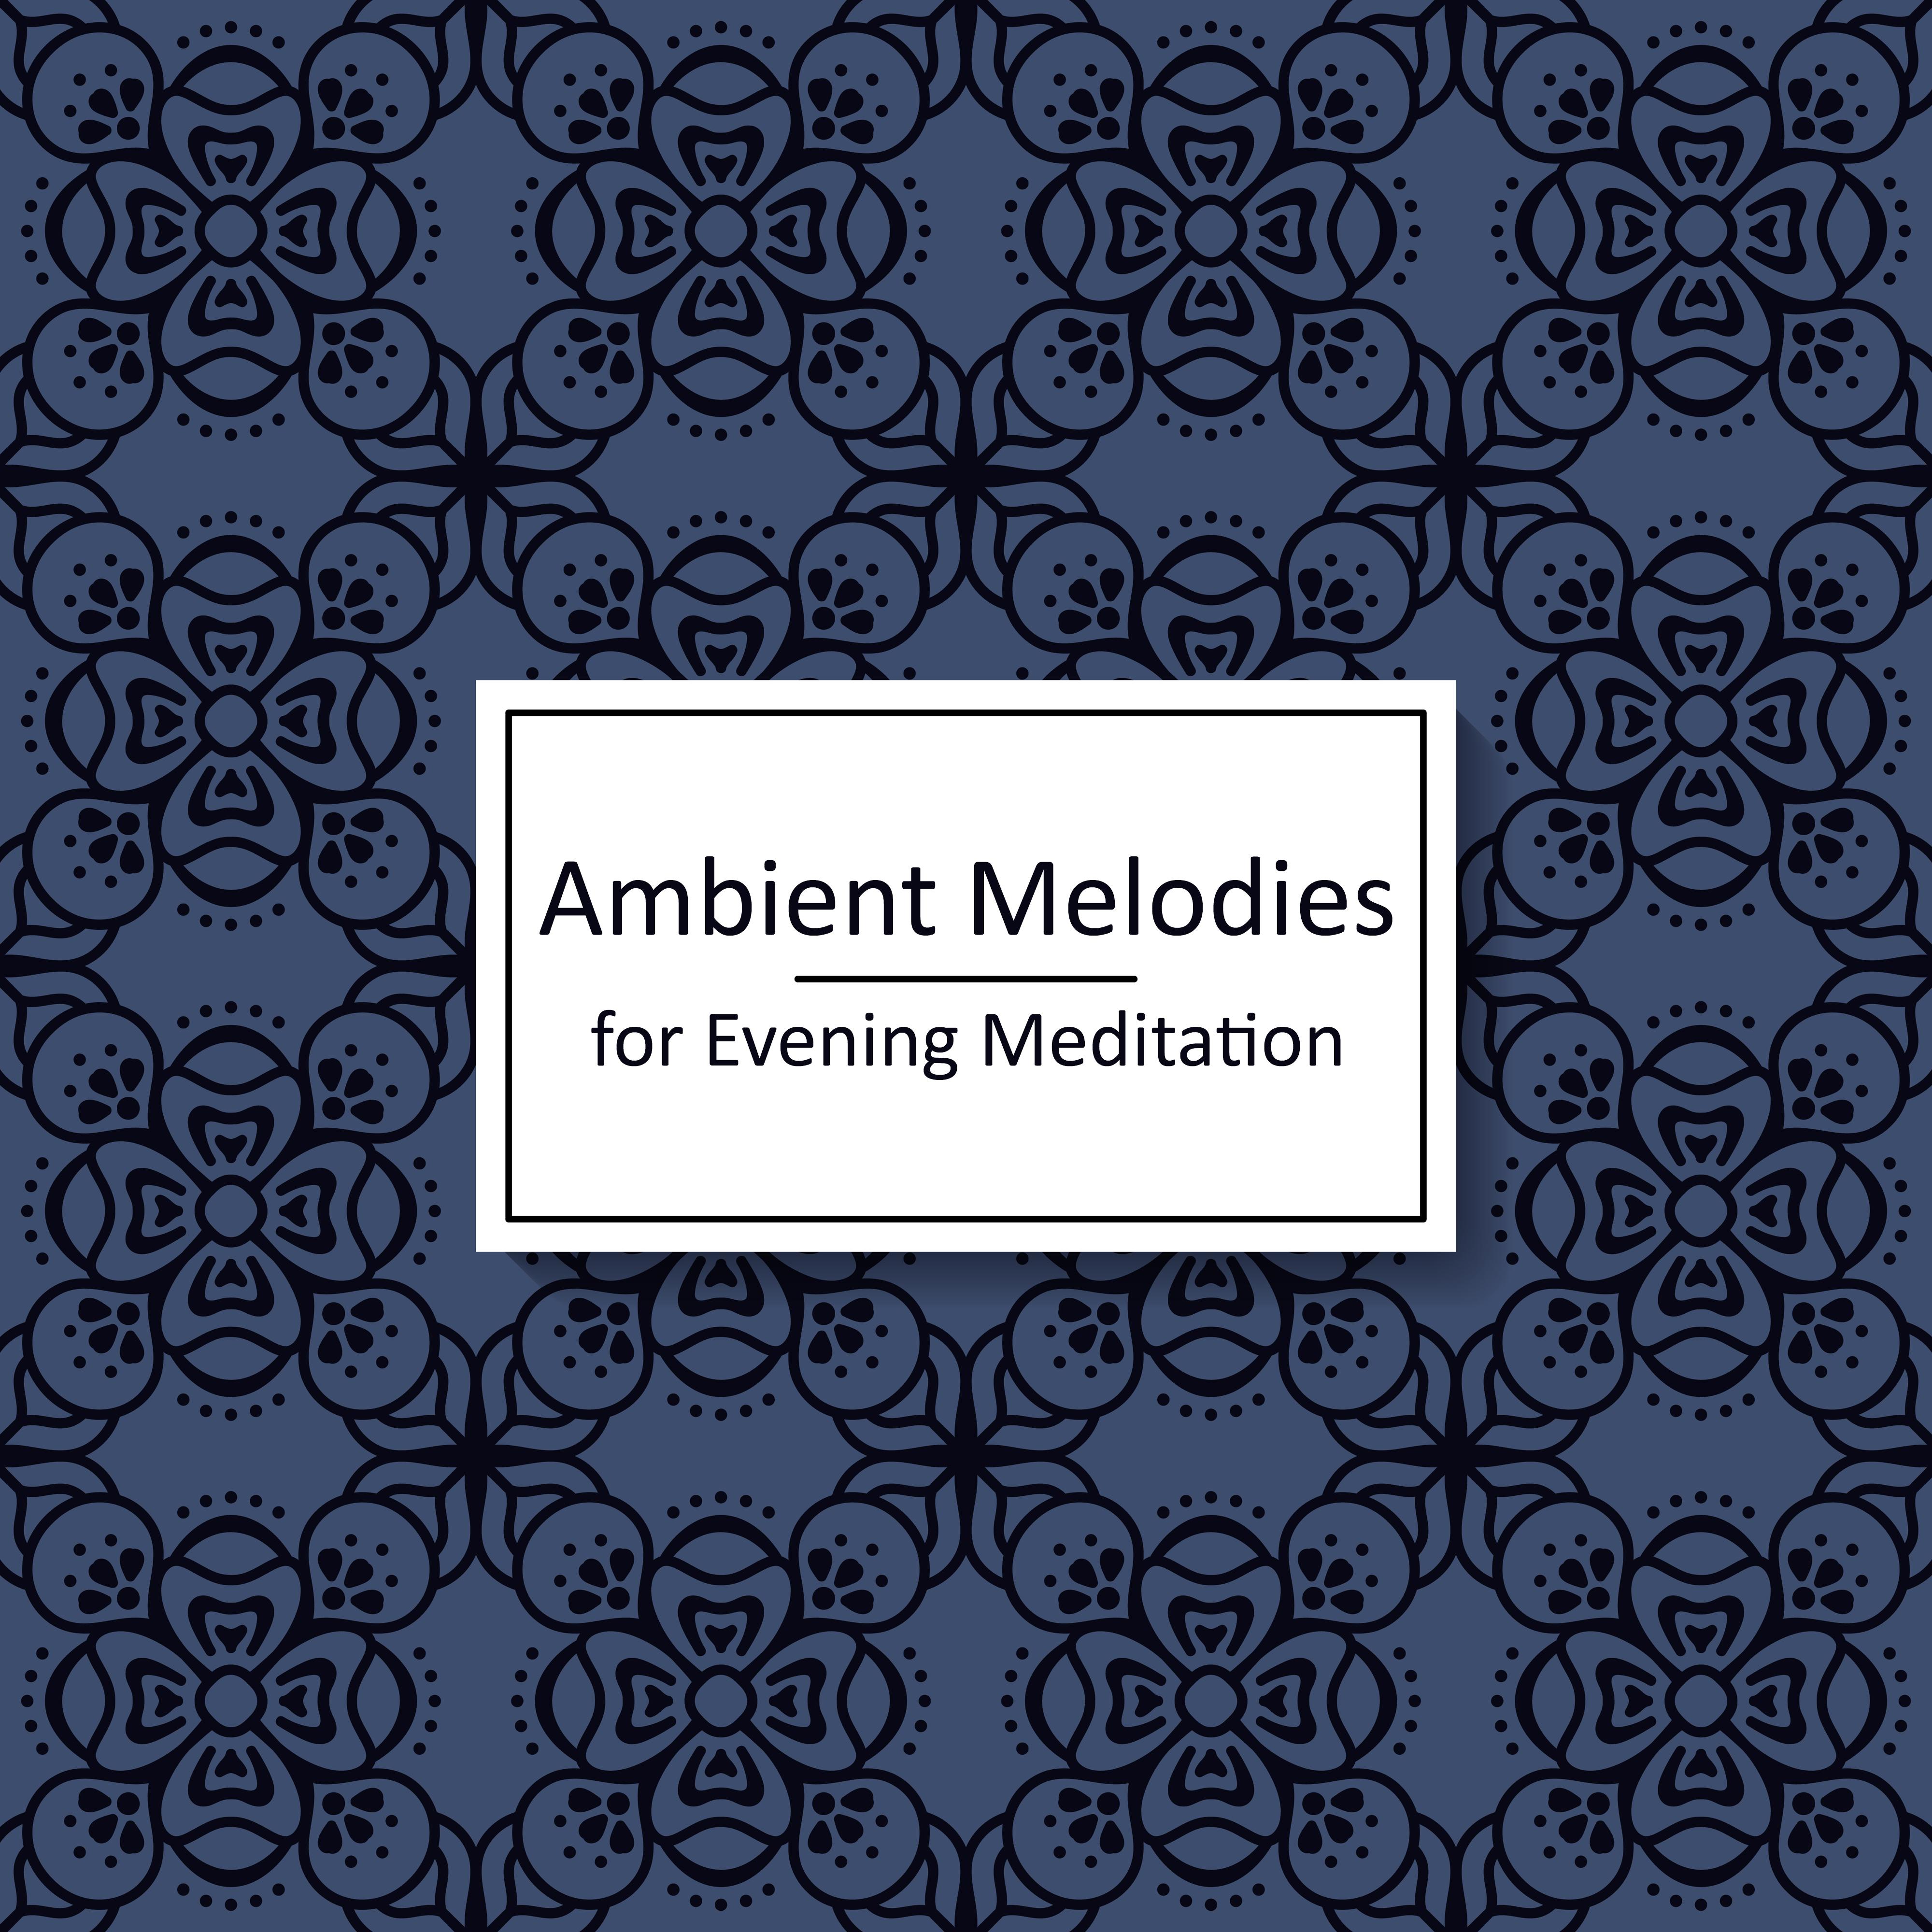 Ambient Melodies for Evening Meditation